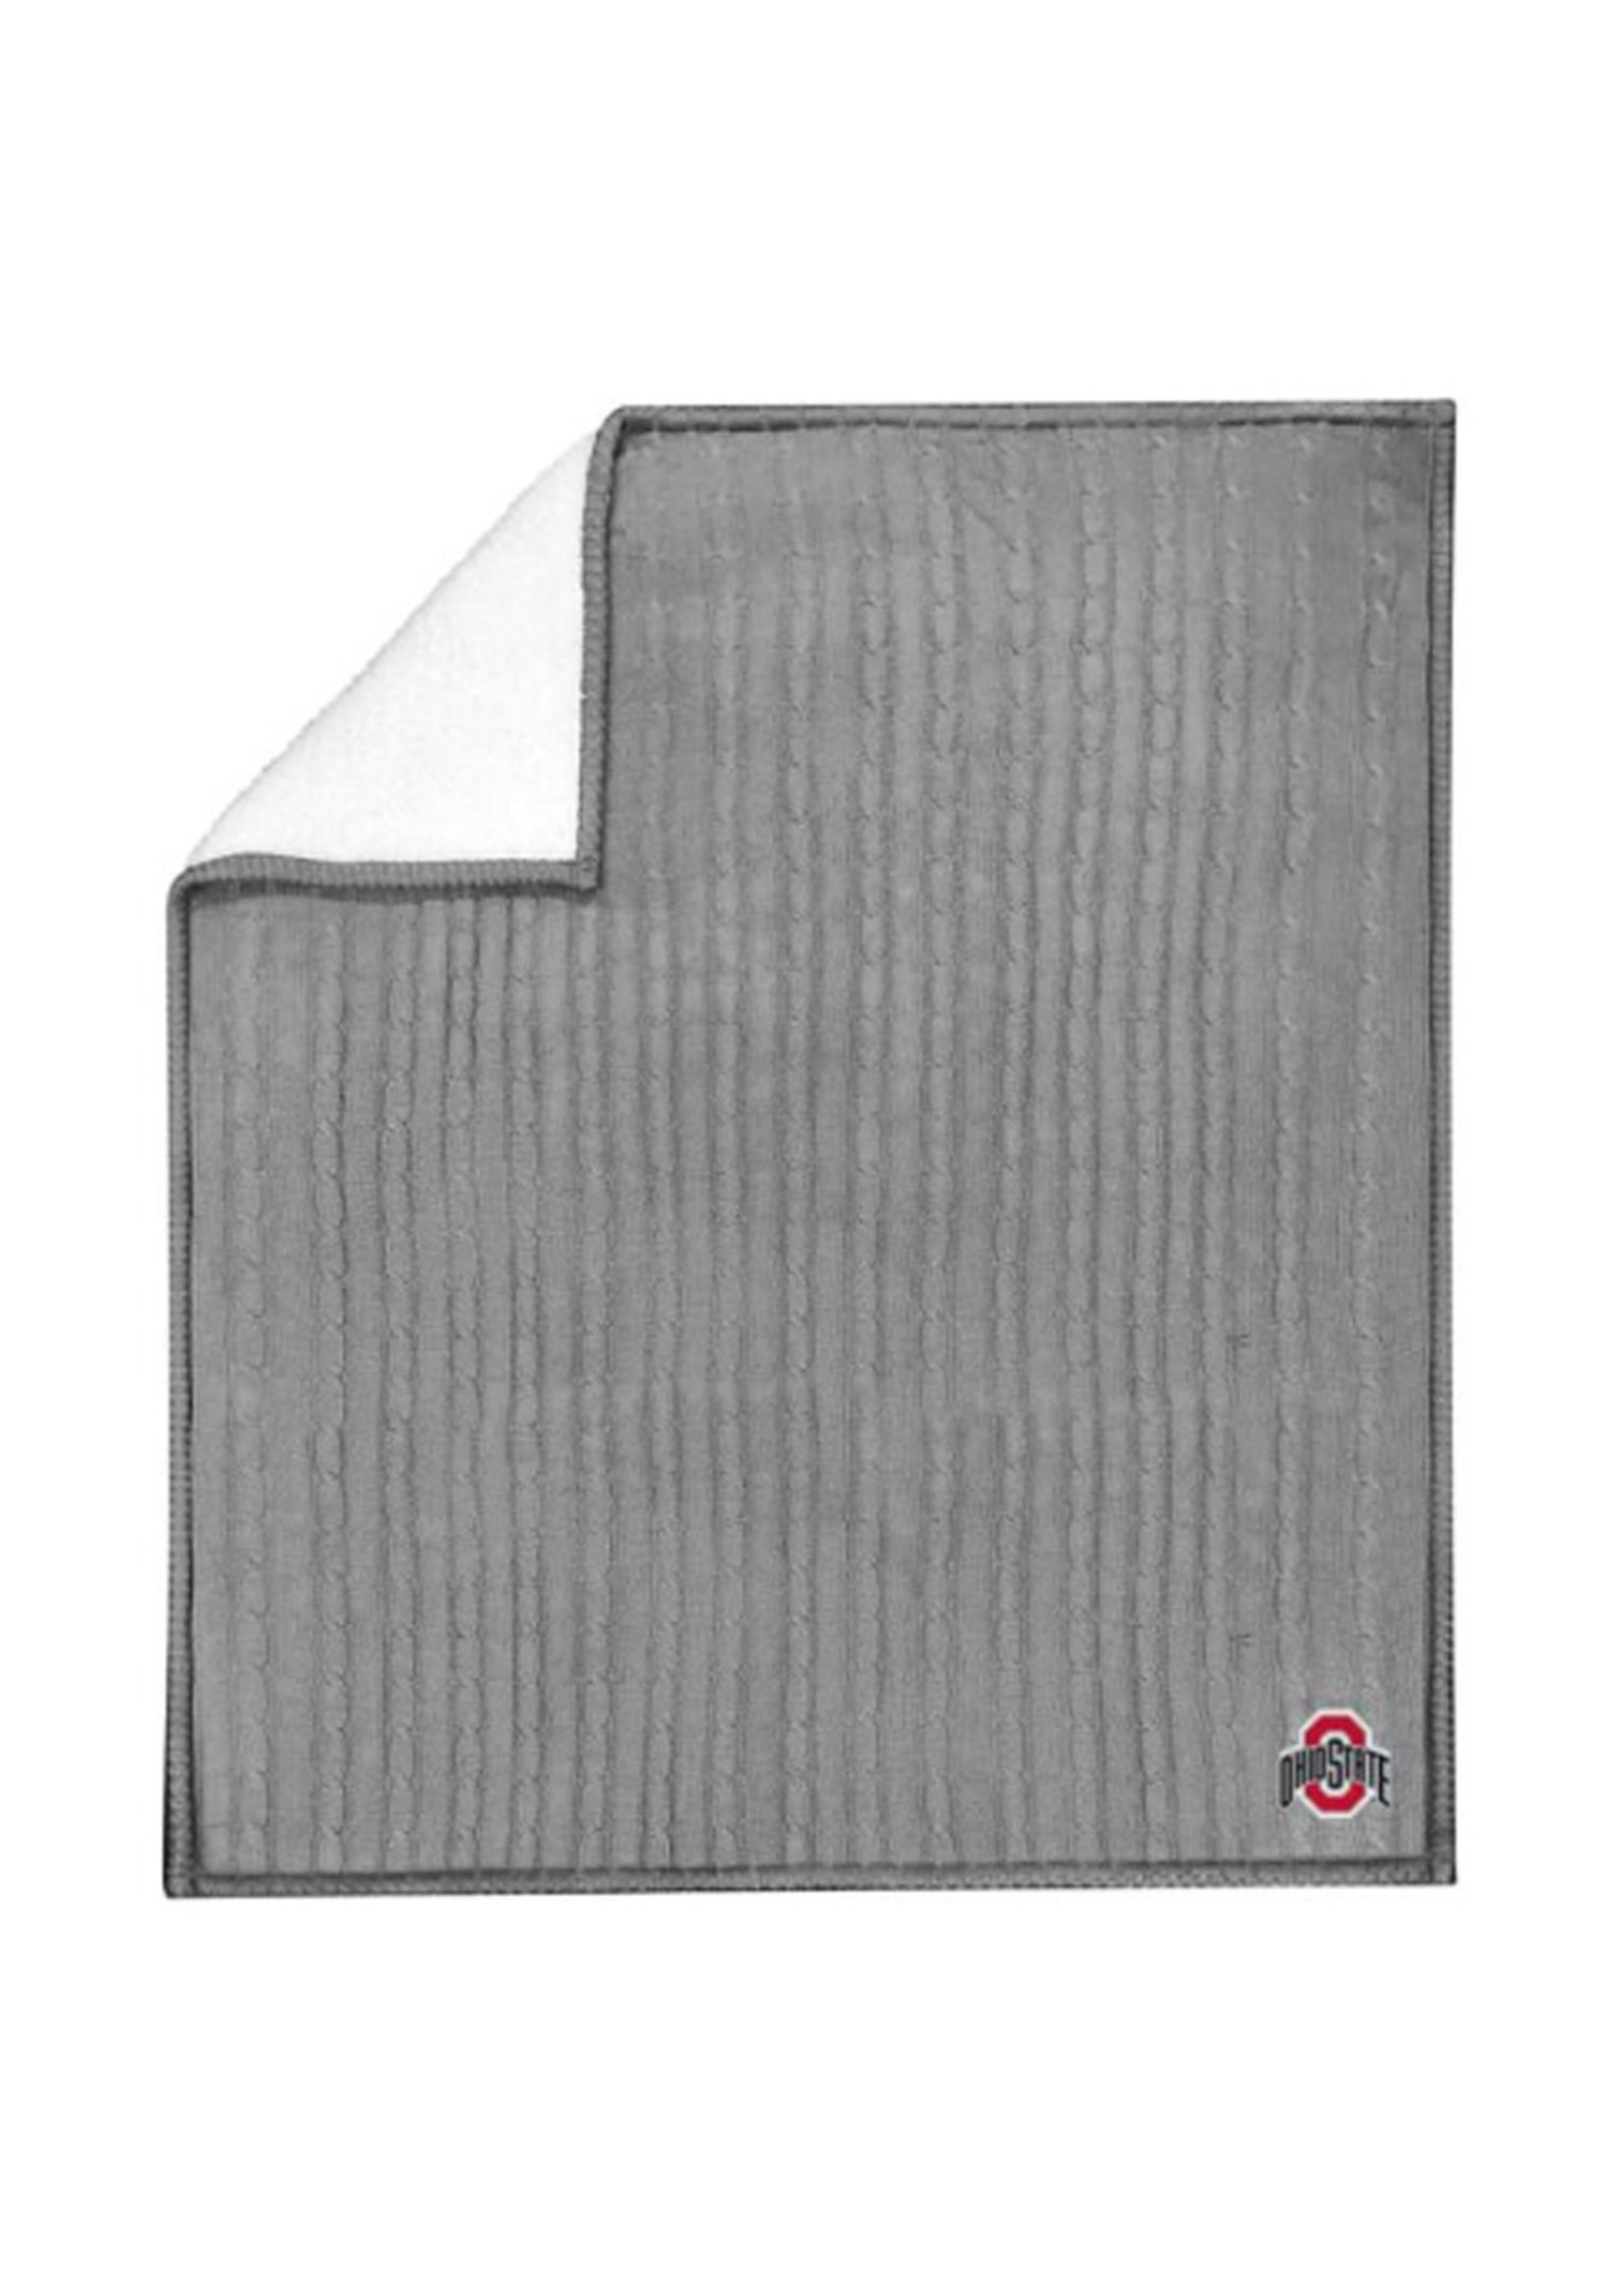 Ohio State Buckeyes Cable Sweater Knit Sherpa Throw Blanket